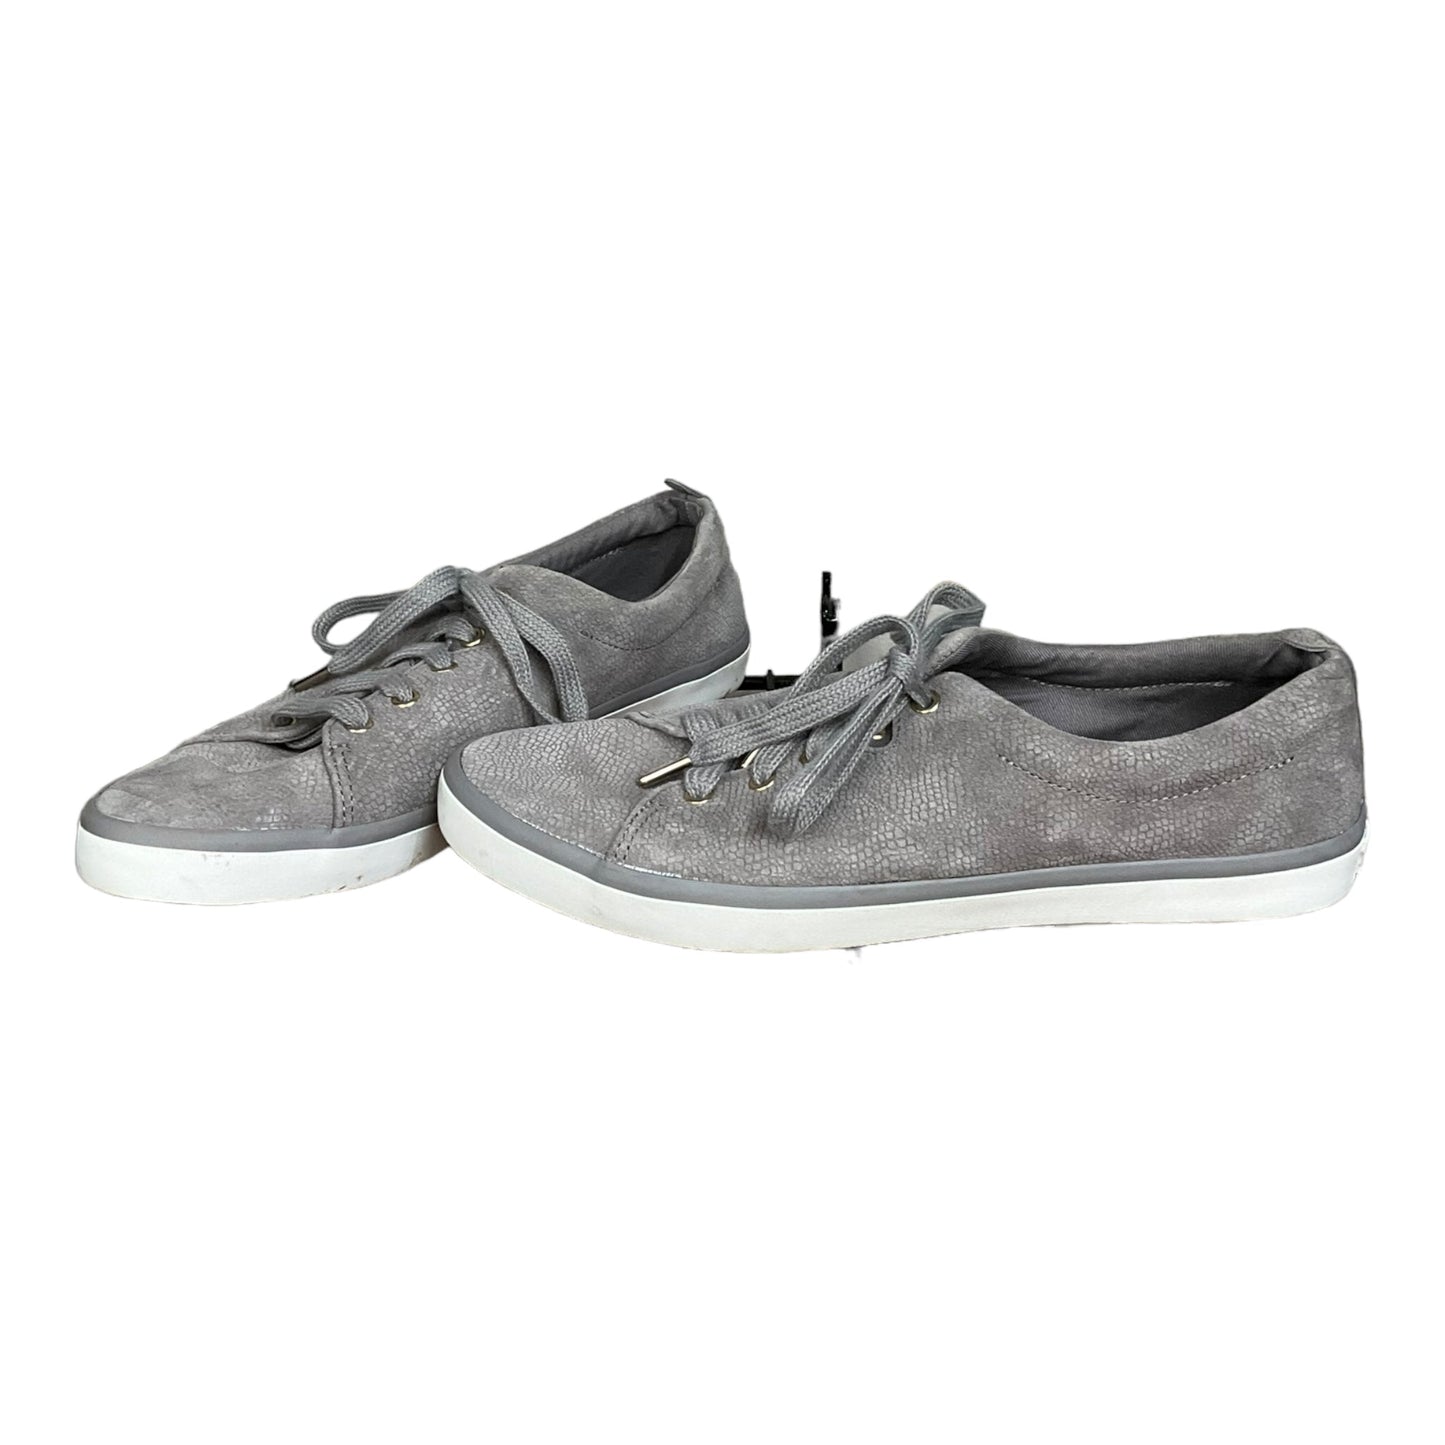 Grey Shoes Flats Sperry, Size 9